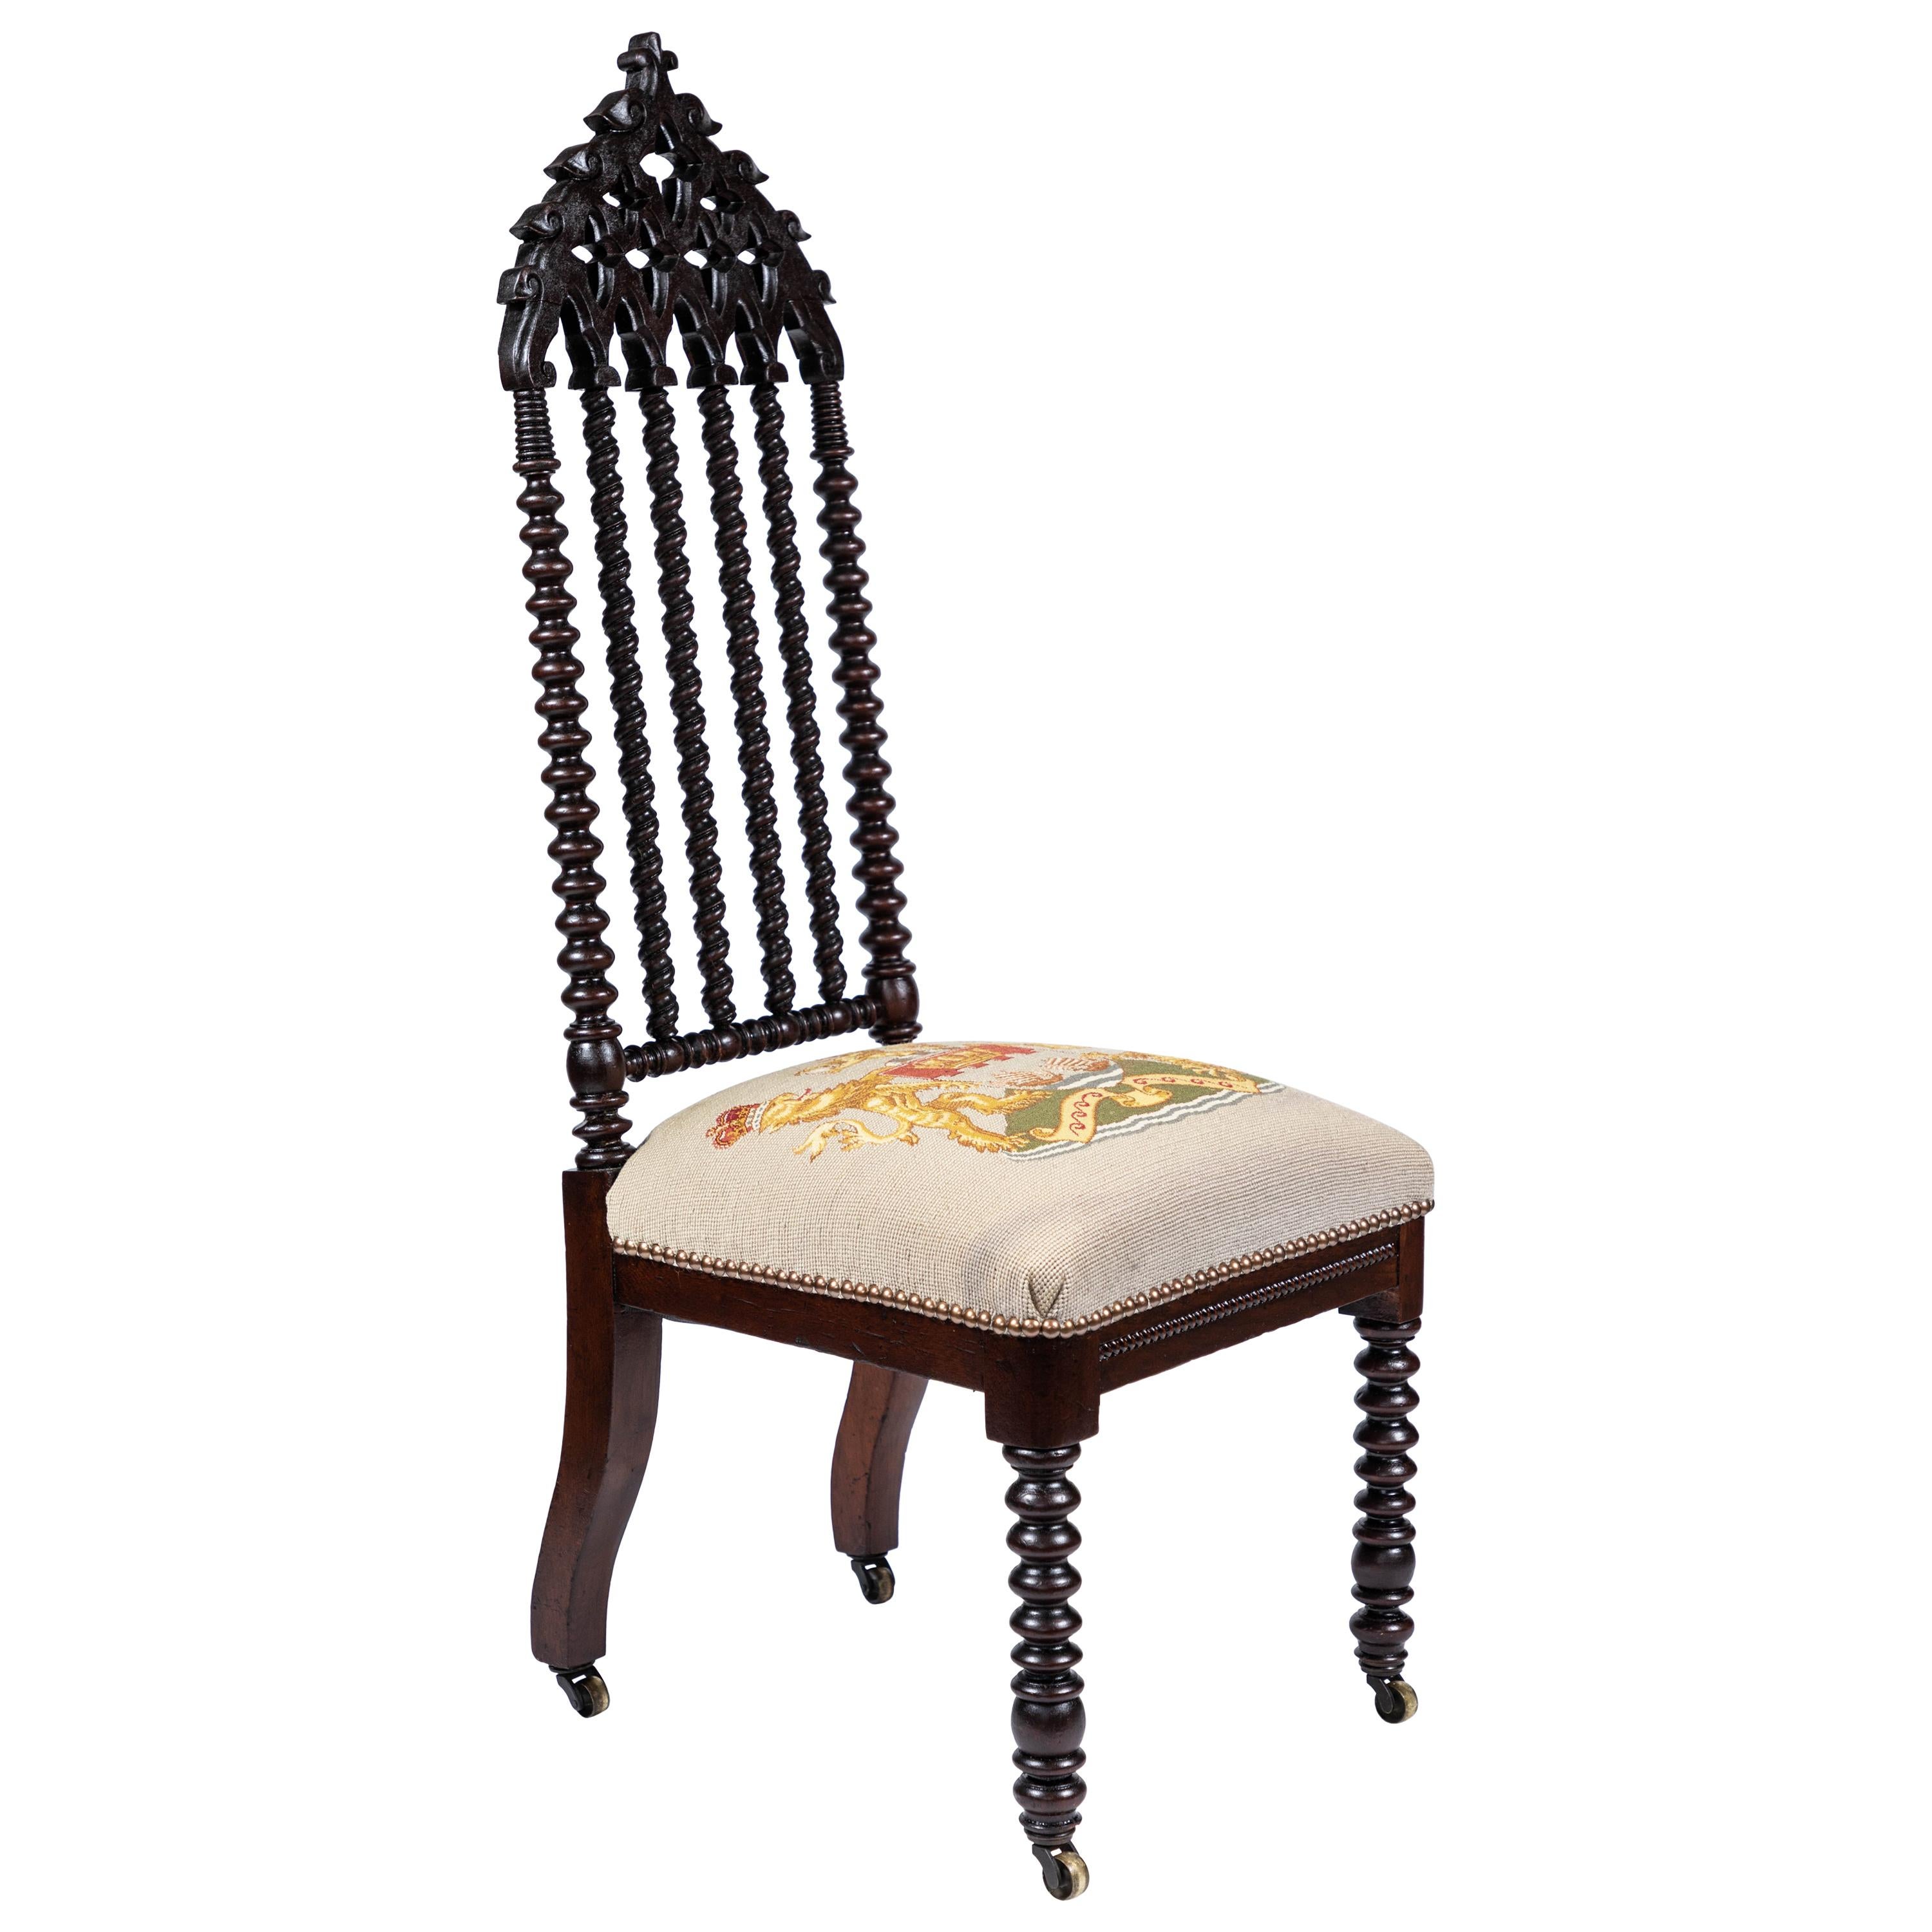 Antique 19th Century Gothic Revival Style Chair 